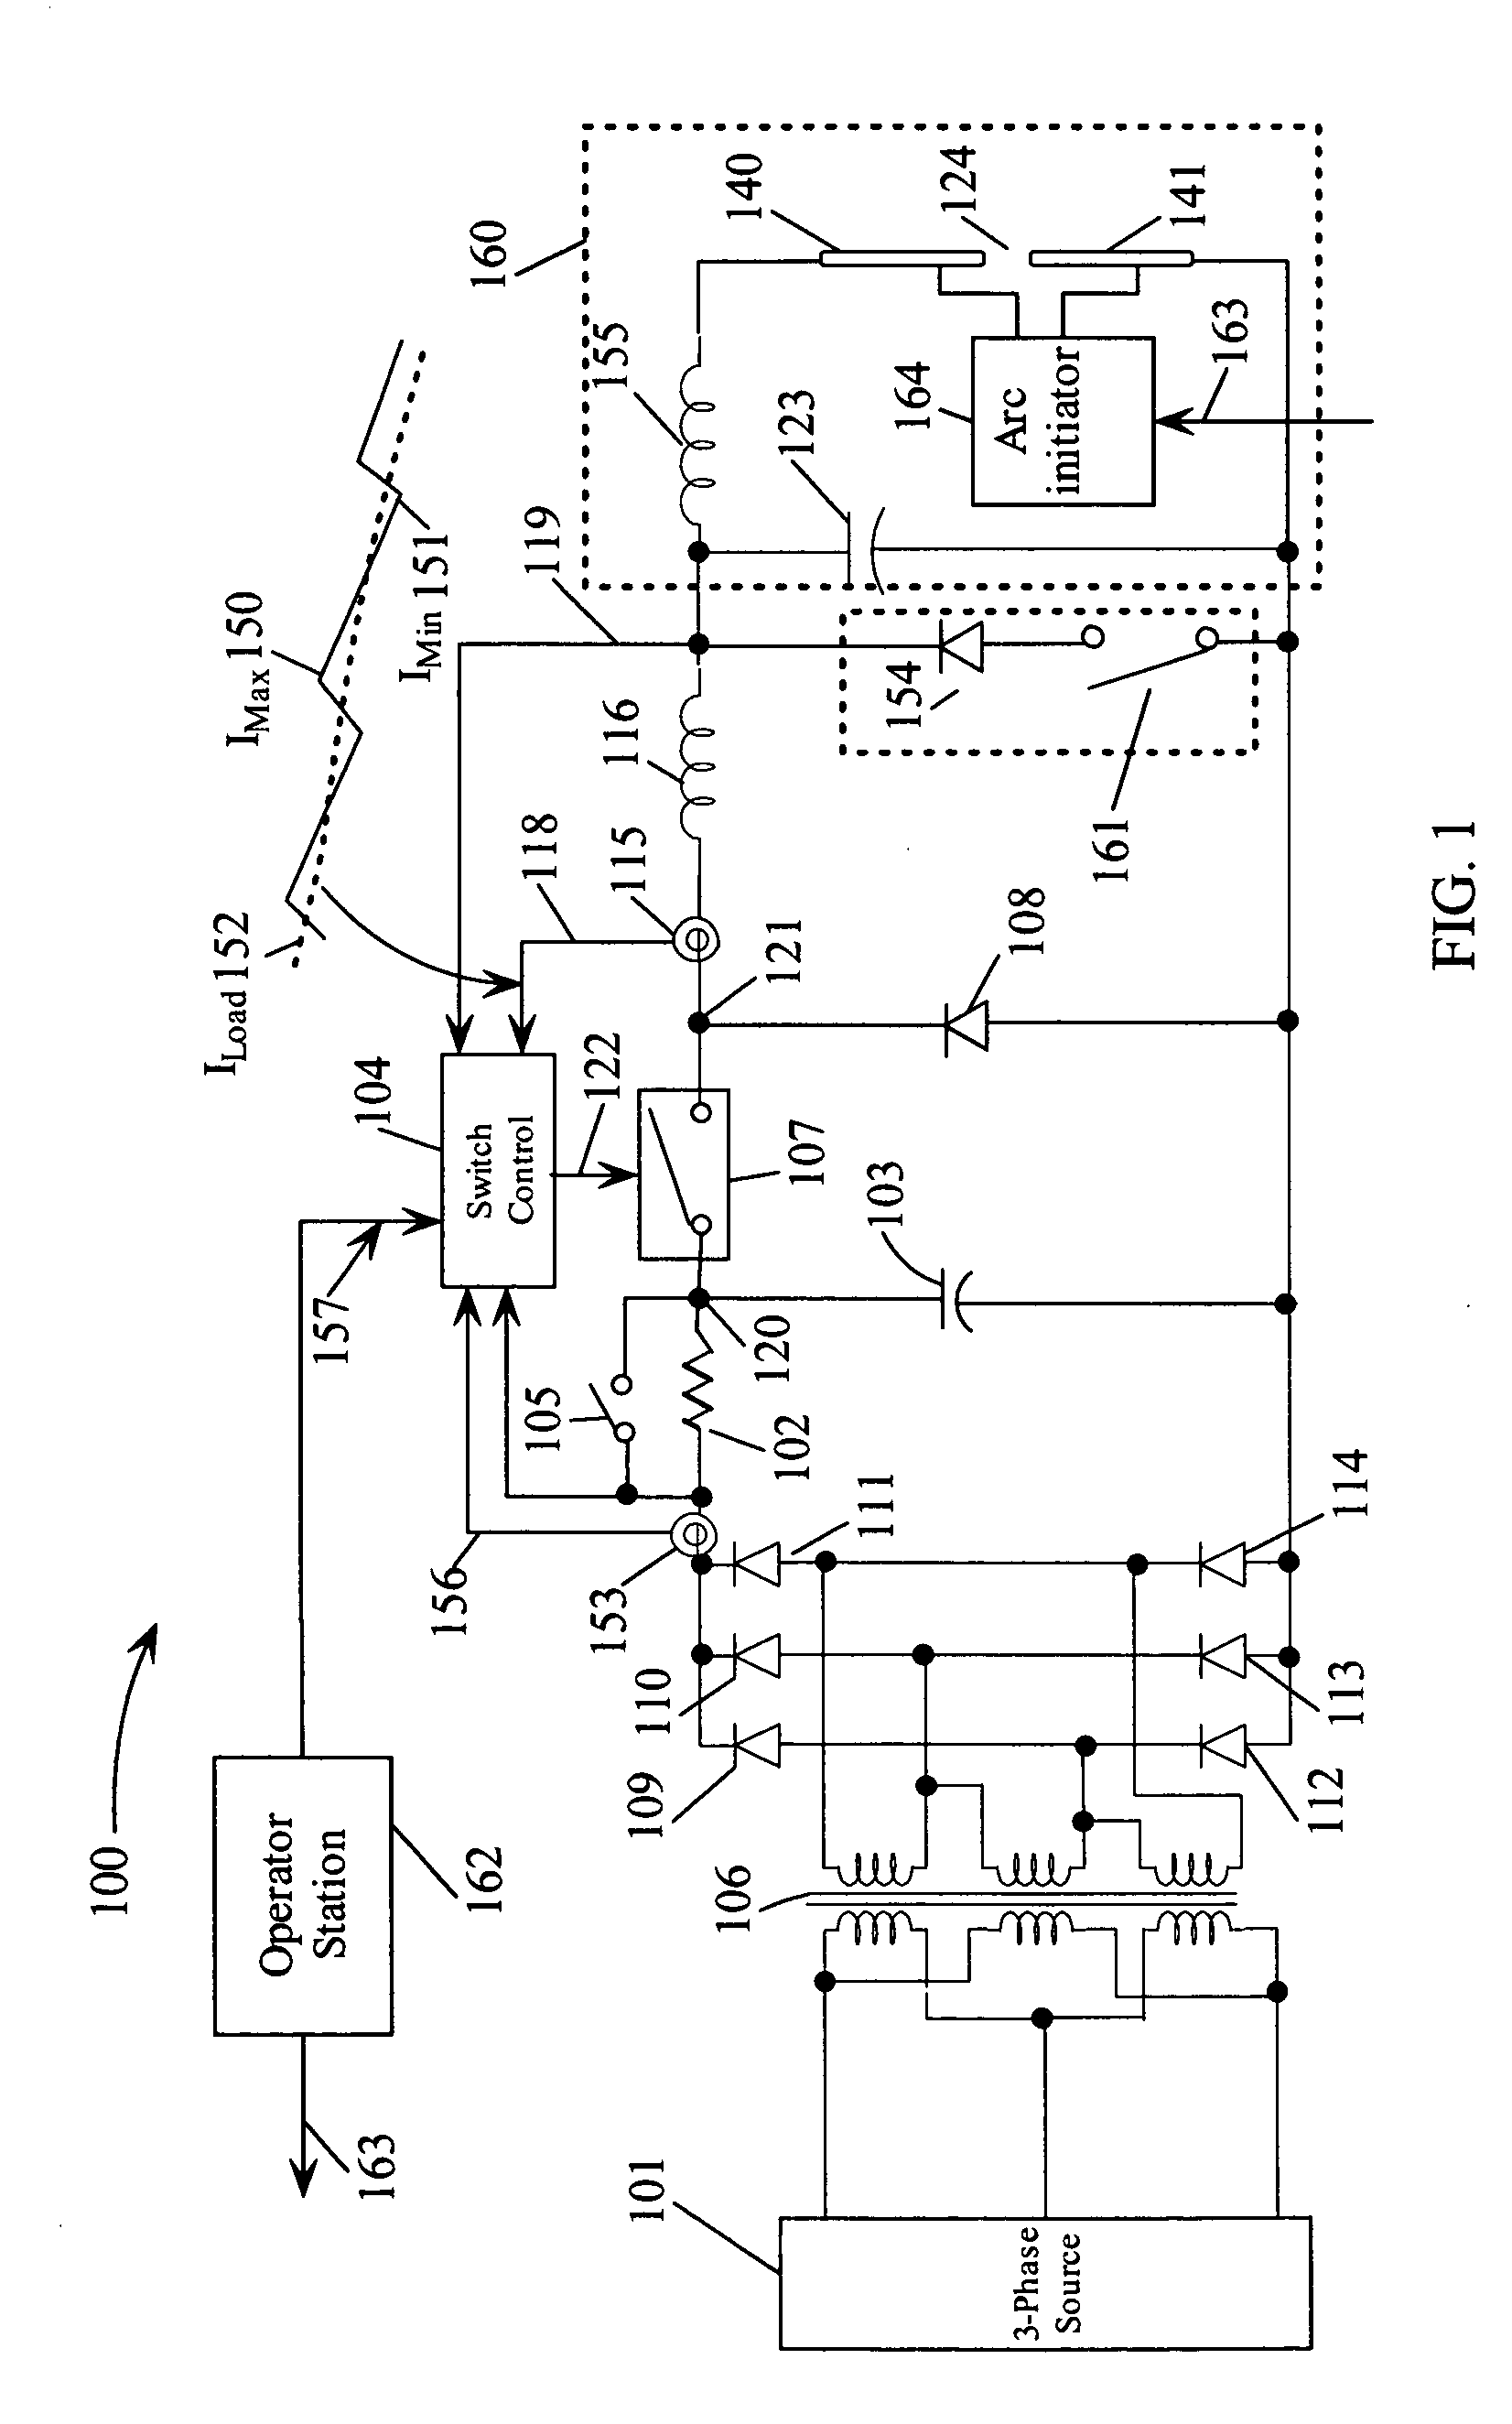 Method and circuitry for charging a capacitor to provide a high pulsed power discharge